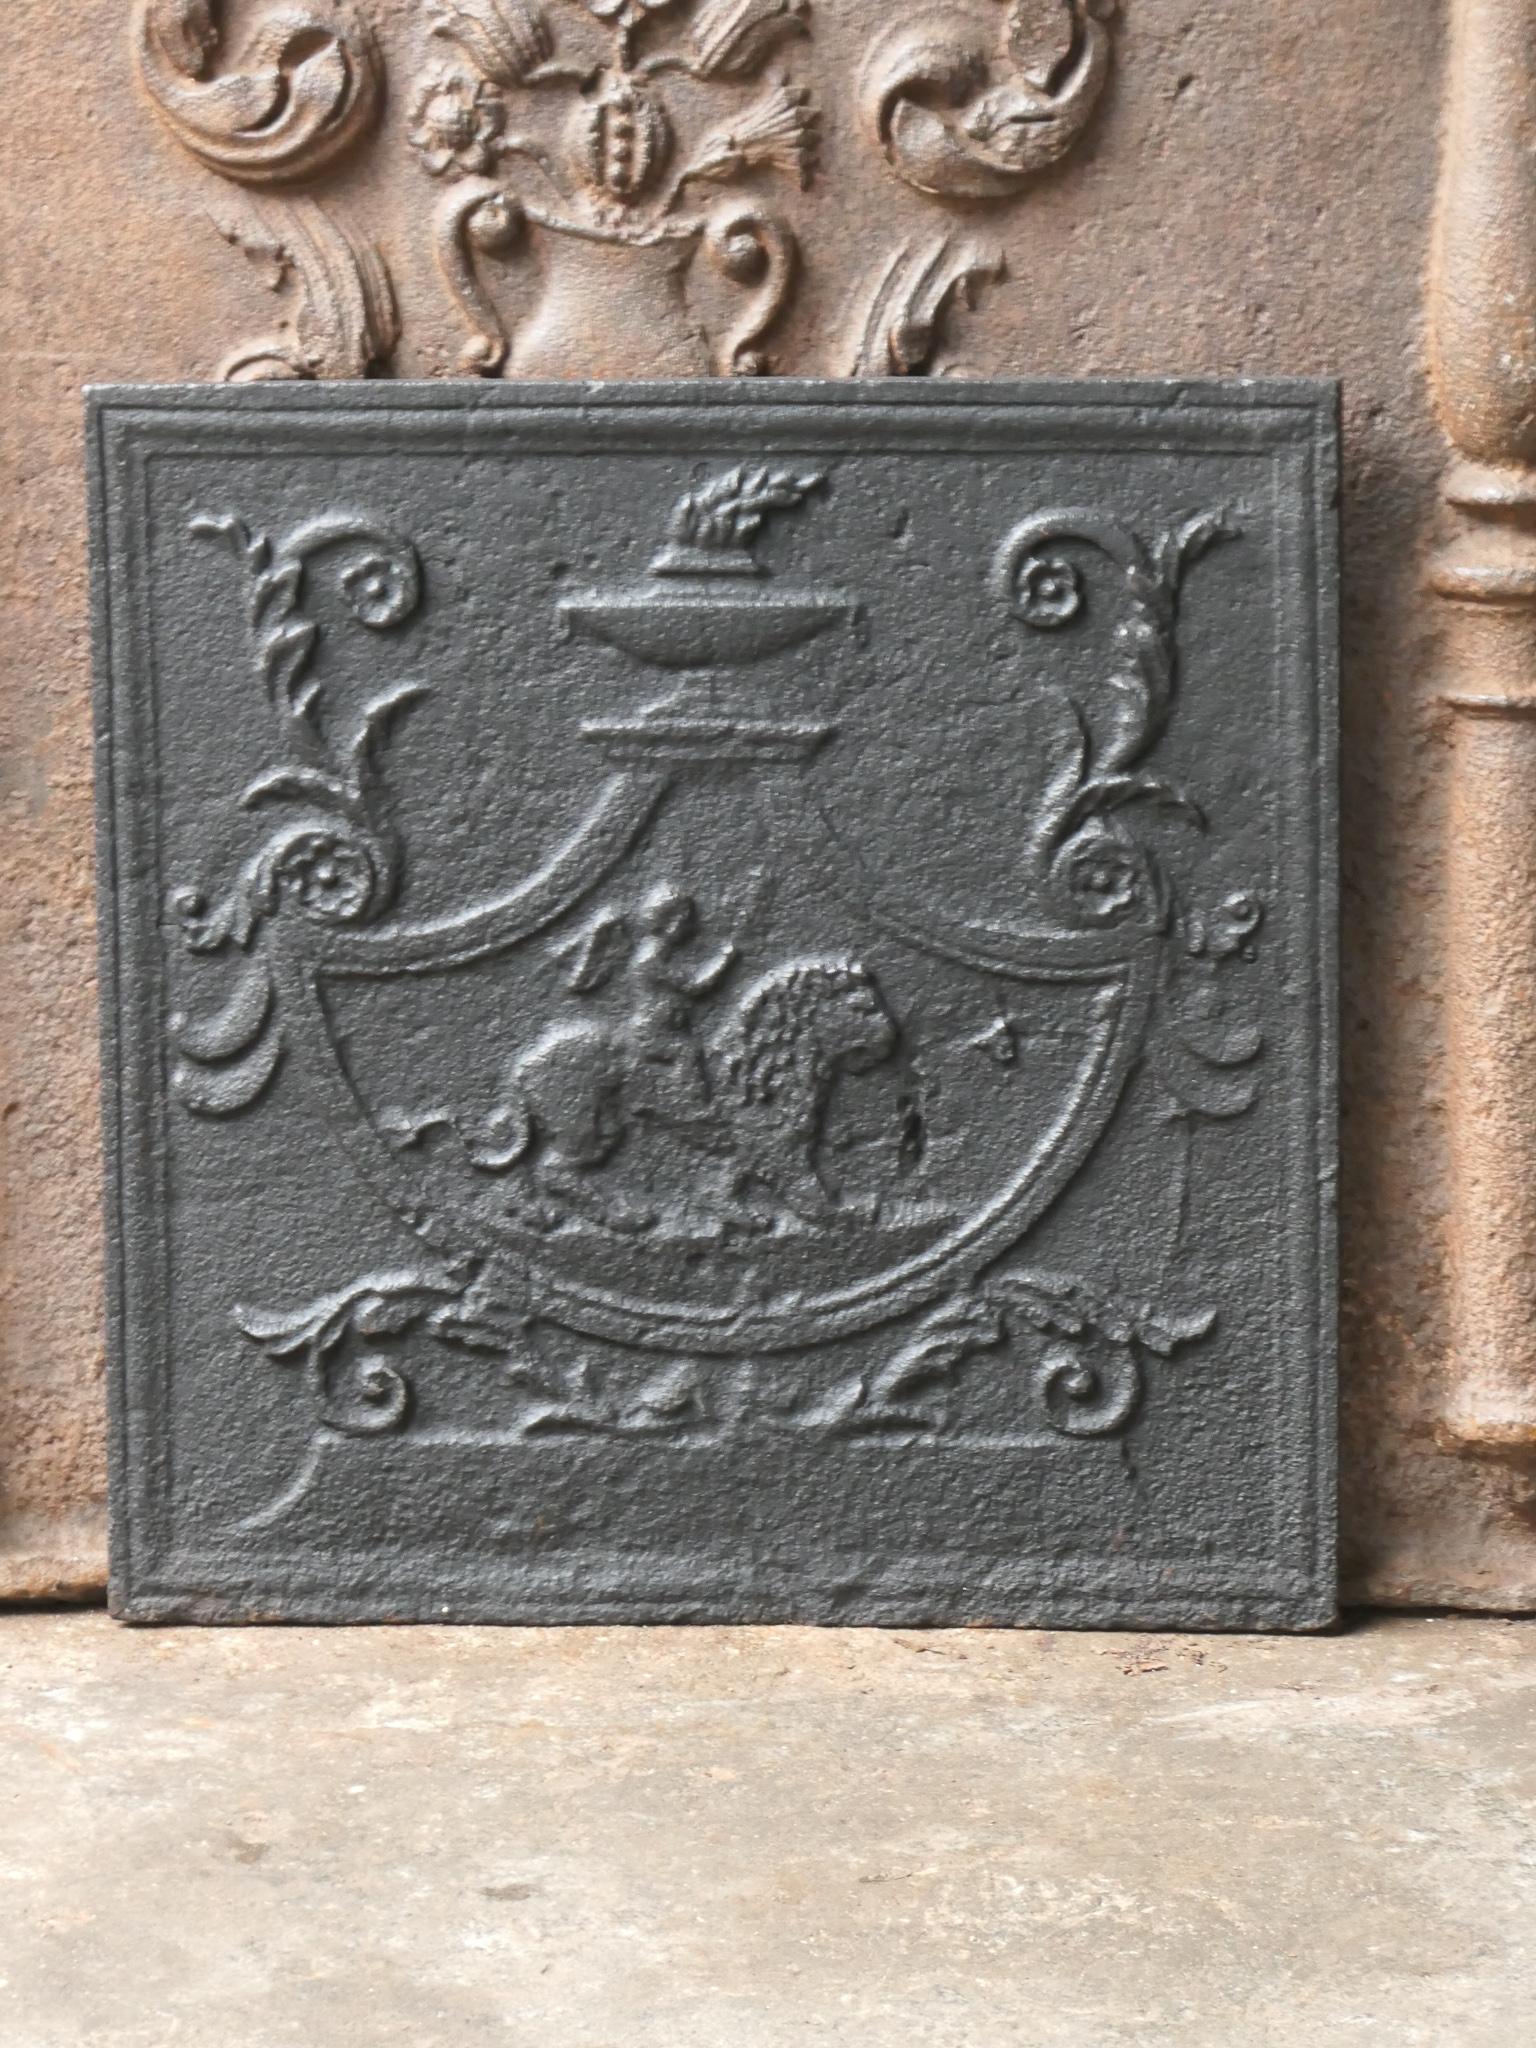 18th - 19th century French neoclassical fireback. The fireback is made of cast iron and has a black / pewter patina. It is in a good condition and does not have cracks.











